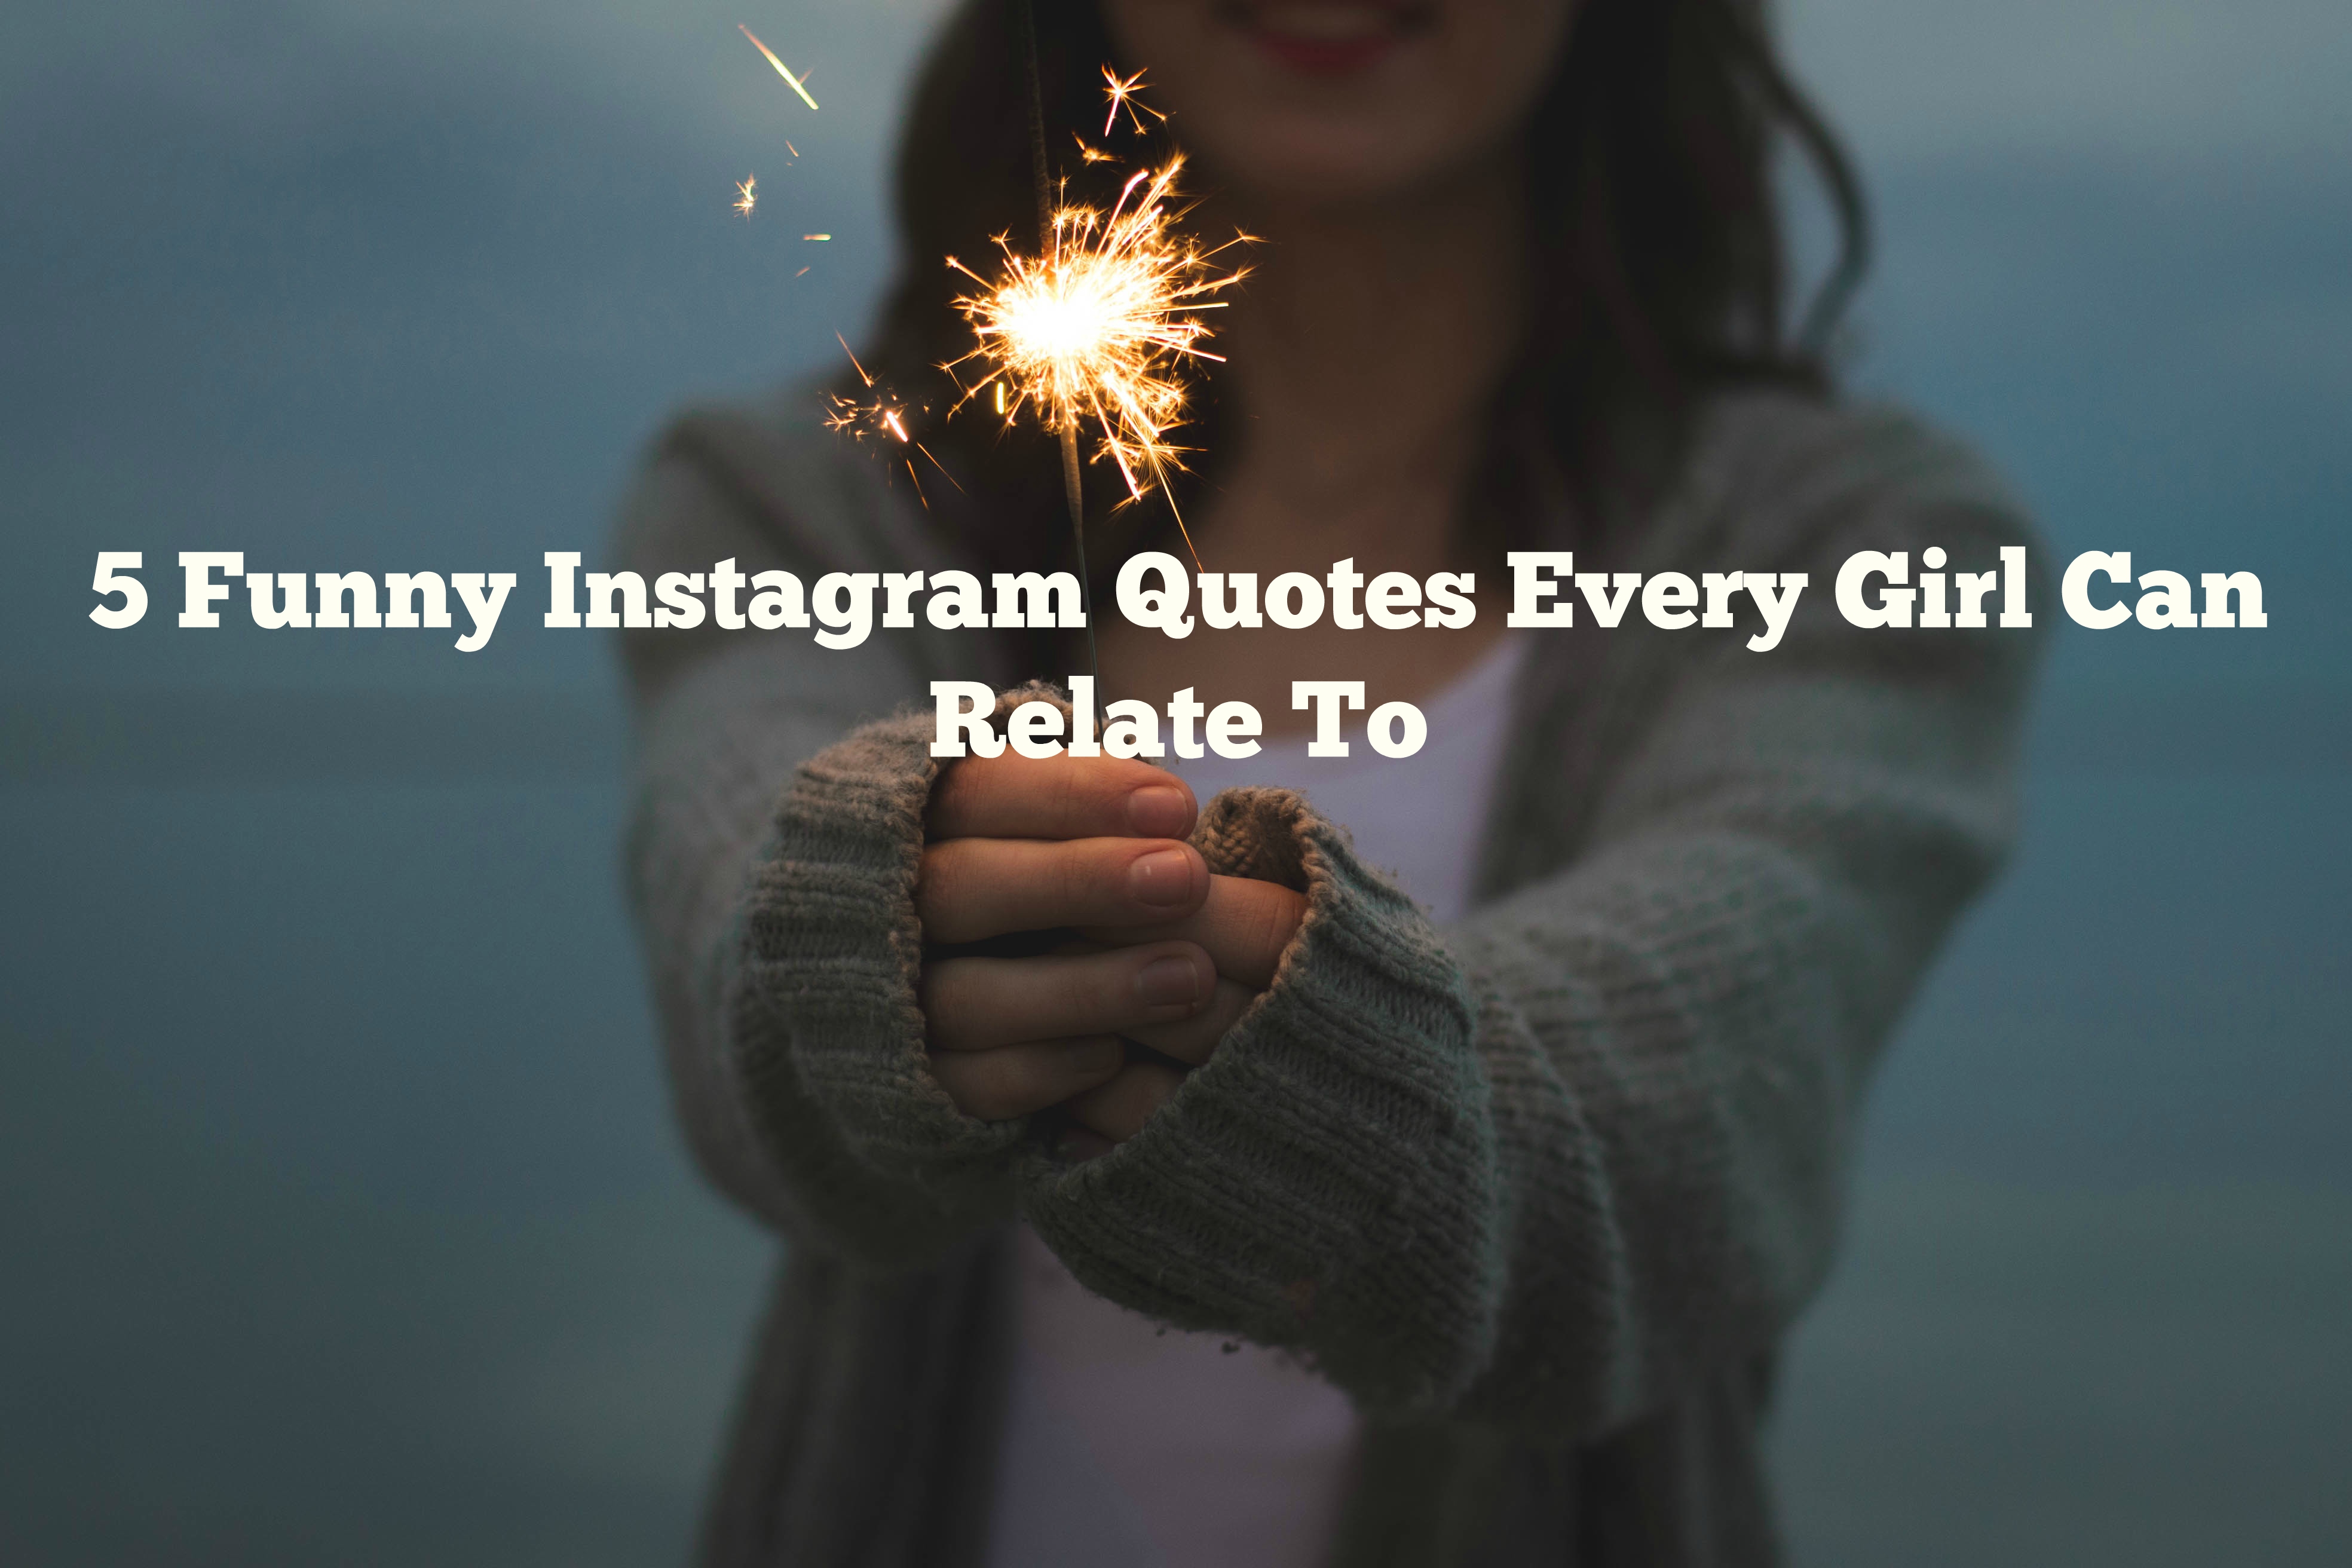 5 Funny Instagram Quotes Every Girl Can Relate To - HerFeed